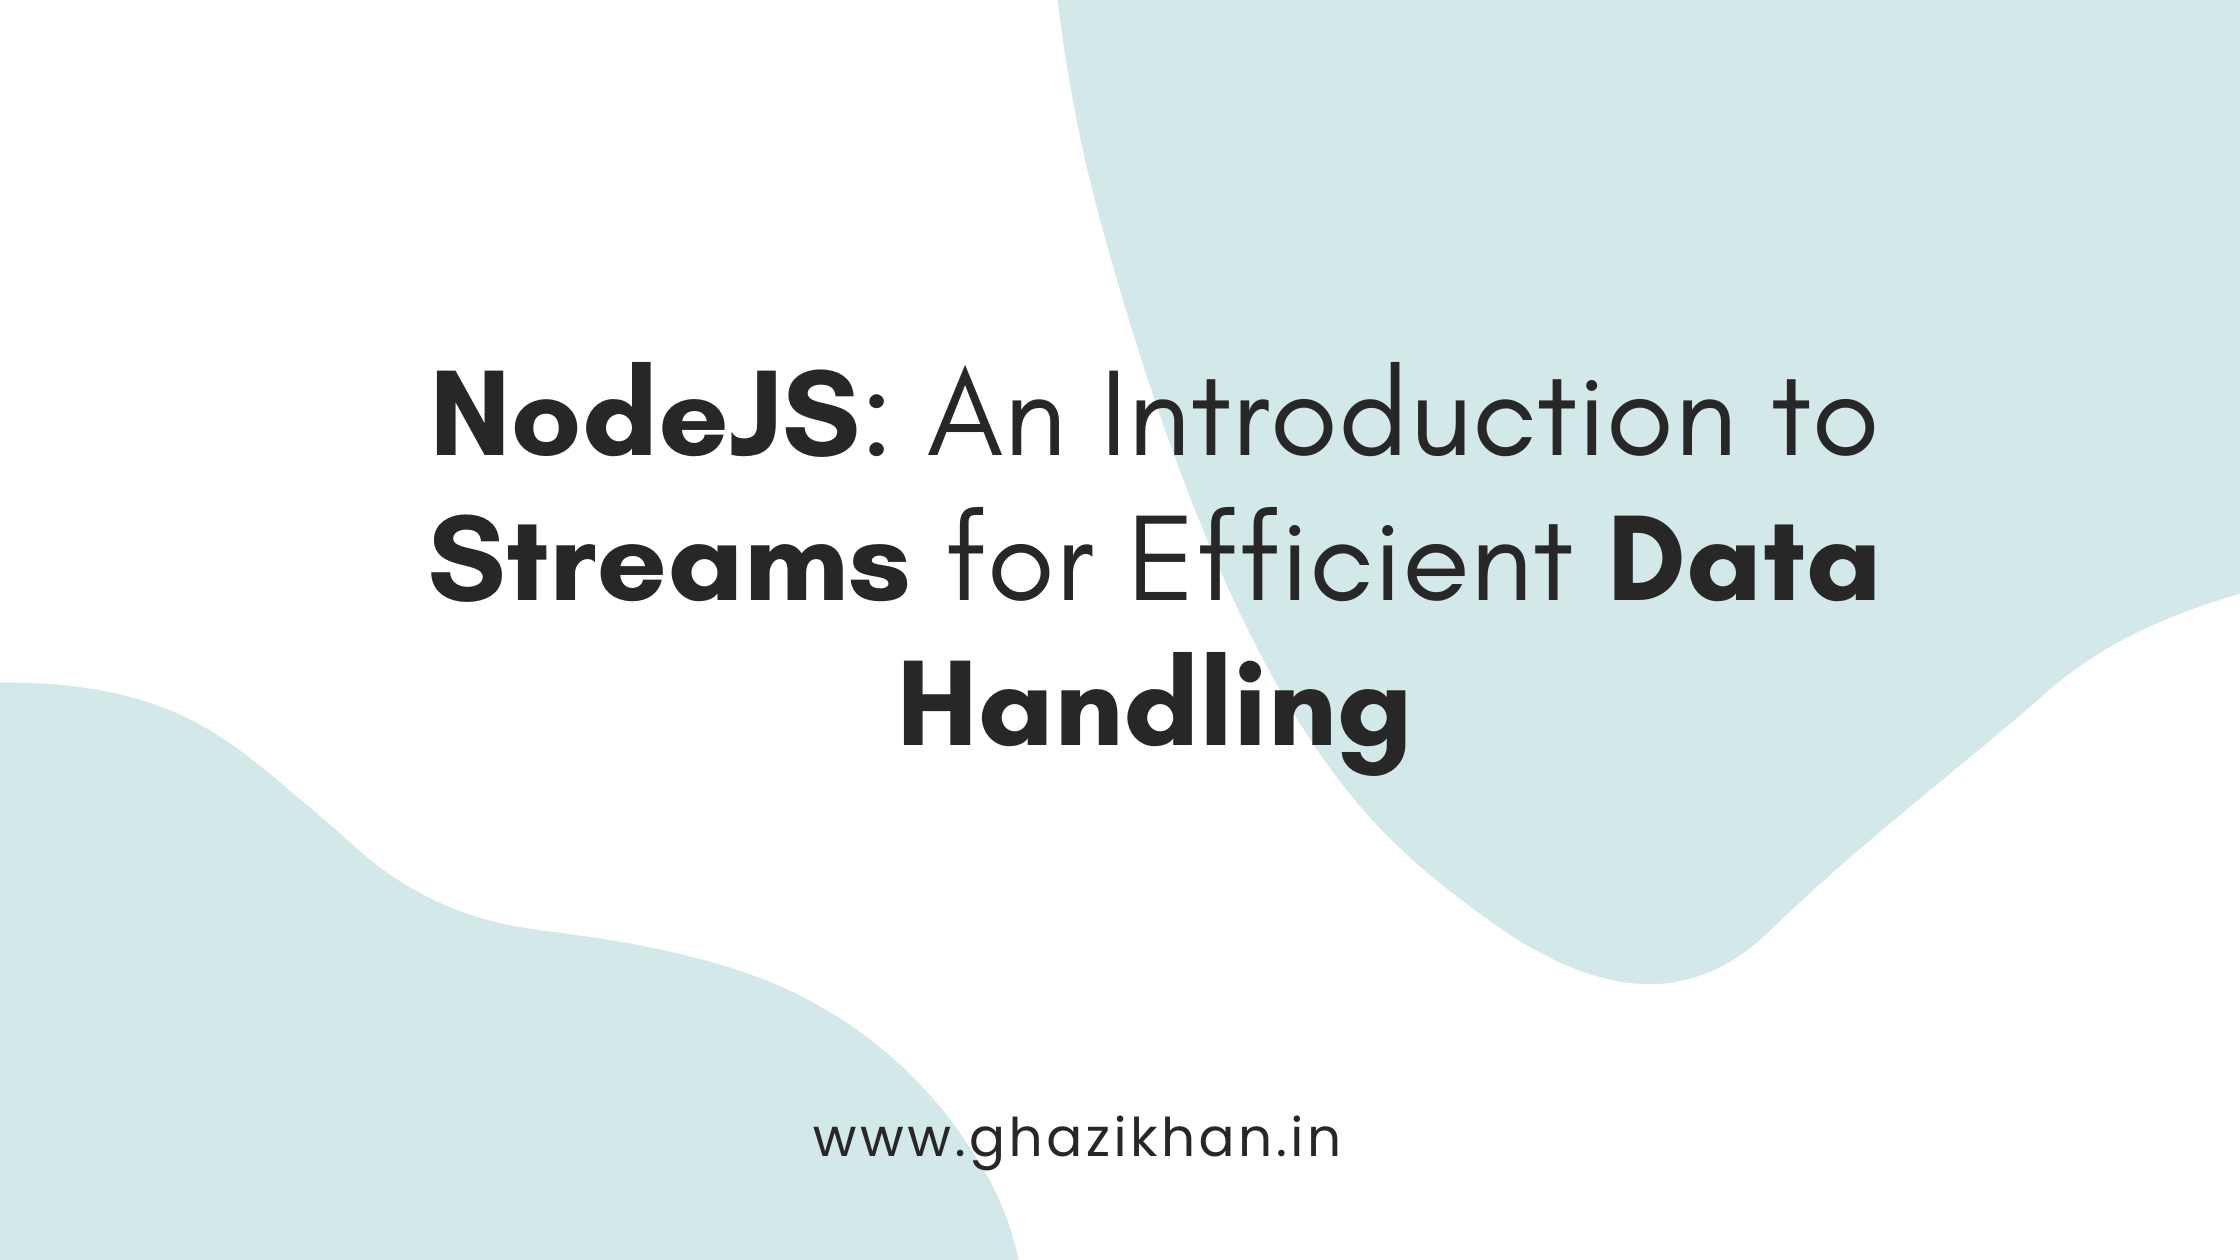 NodeJS: An Introduction to Streams for Efficient Data Handling